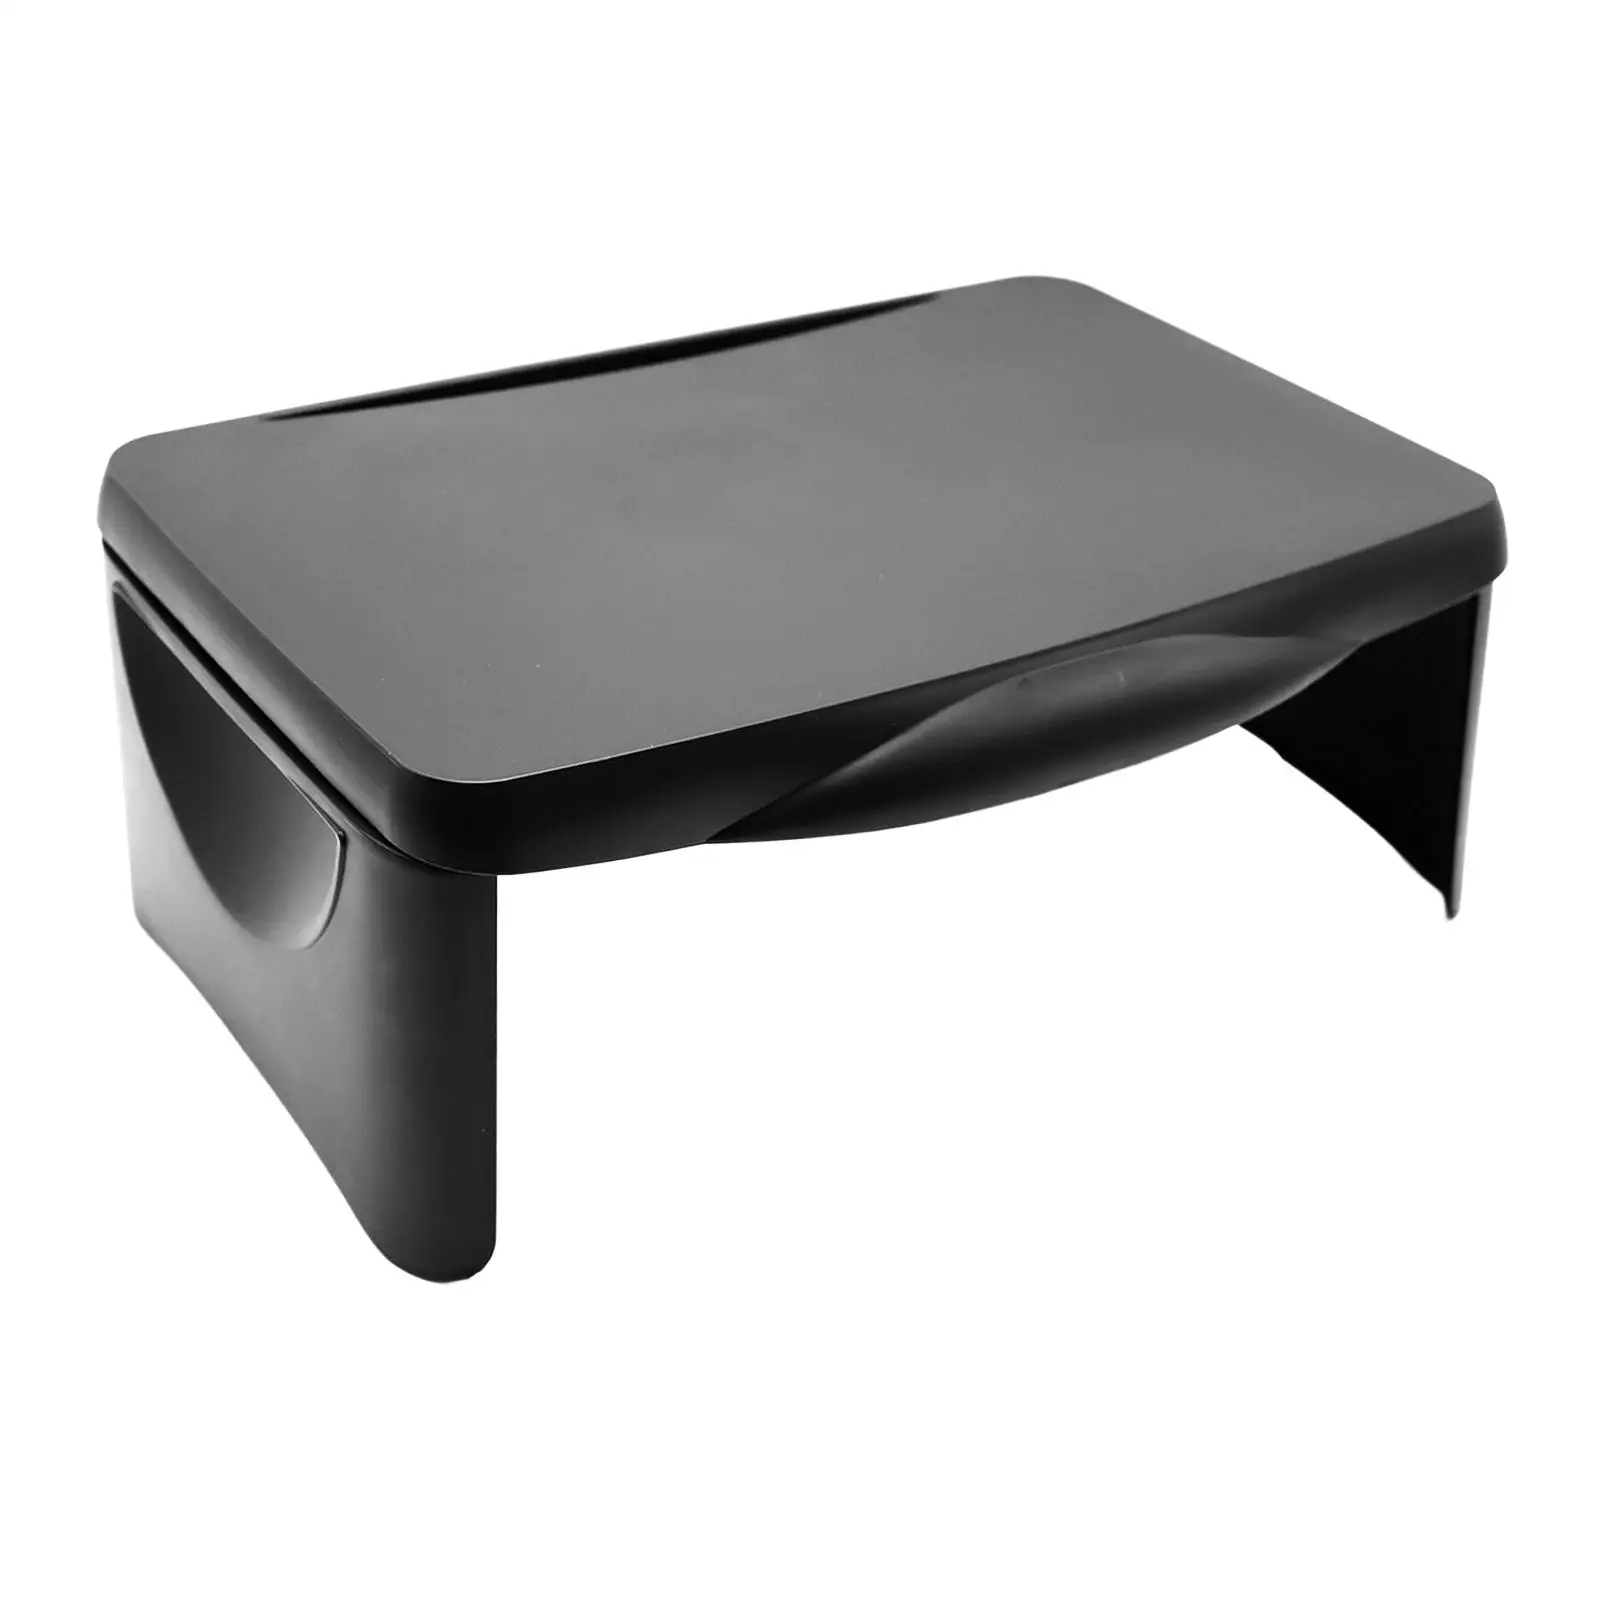 Folding Lap Desk with Storage Compartment Ergonomic PP Adjustable for Bed Computer